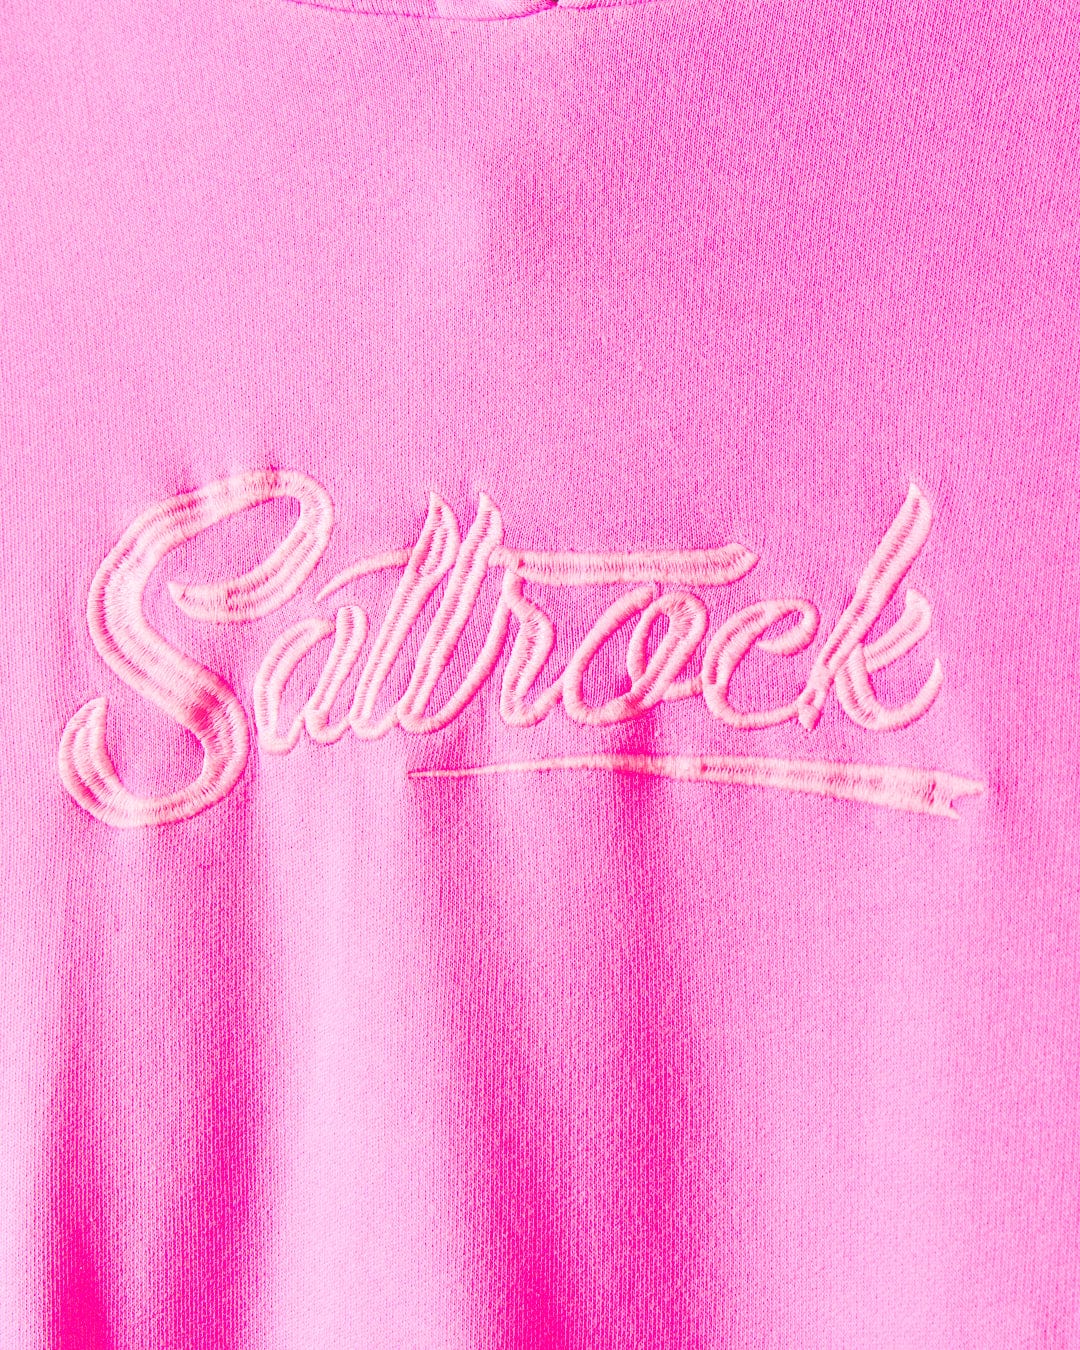 Close-up of a pink garment featuring "Saltrock" embroidered in stylized cursive stitching on the 100% cotton fabric, specifically the Instow - Womens Pop Hoodie - Pink.